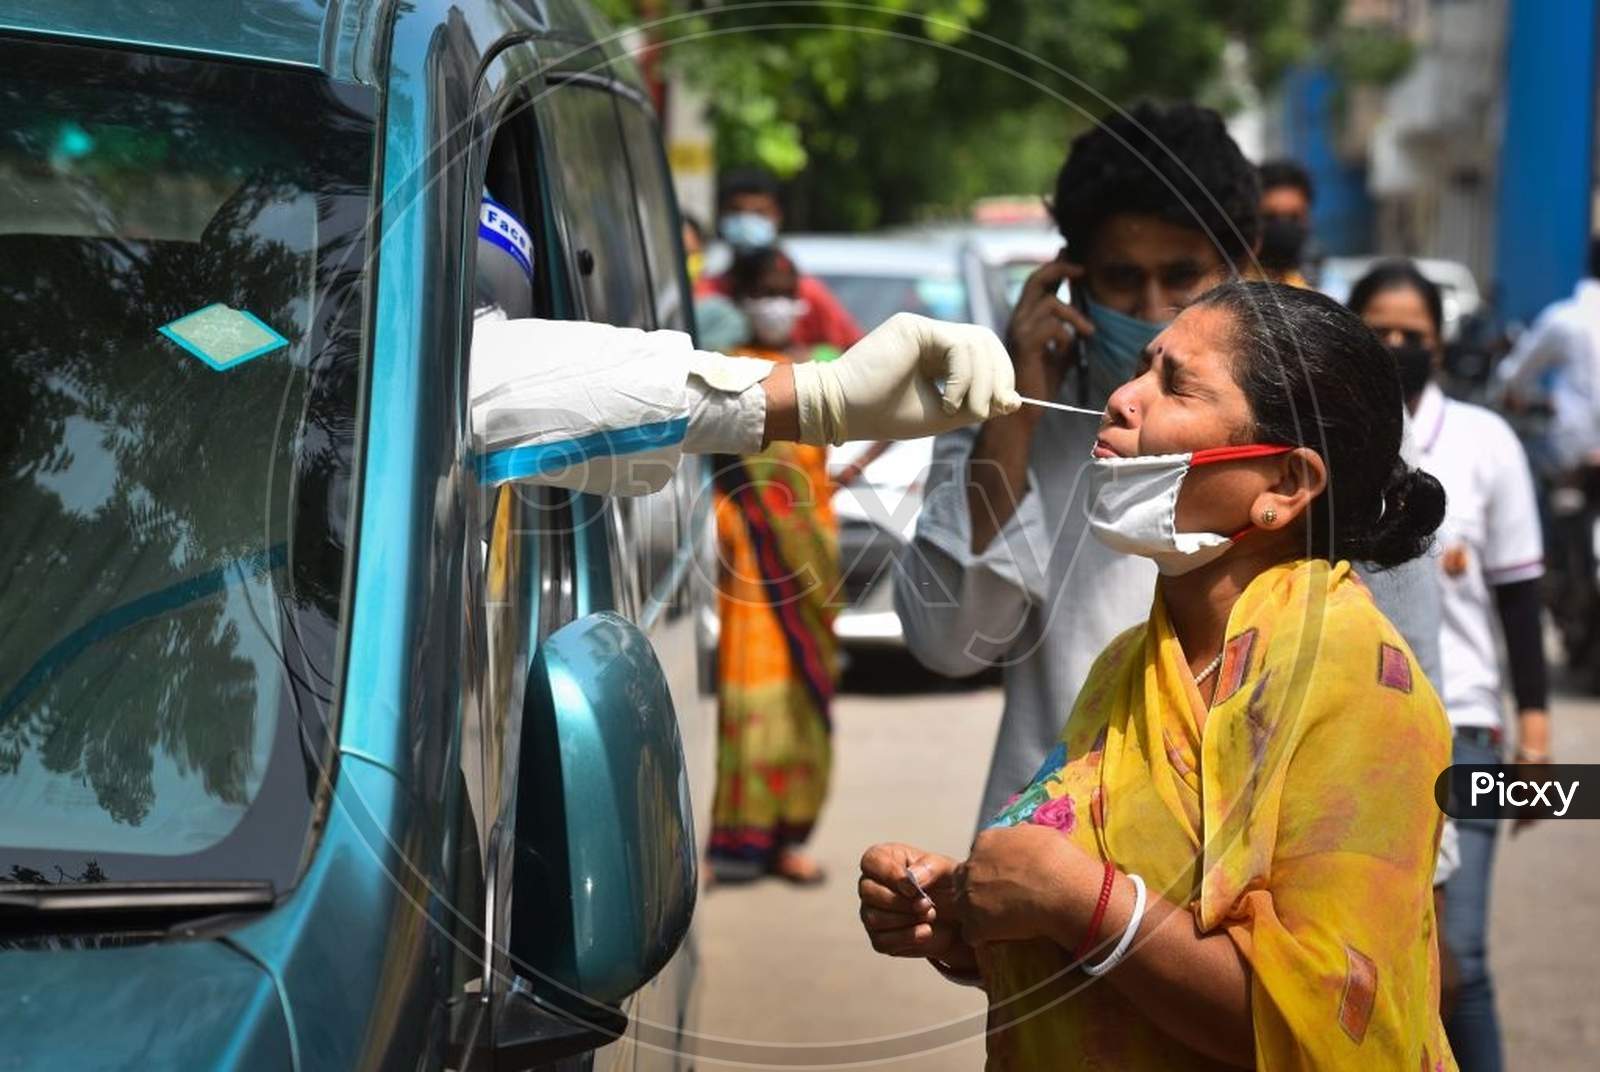 New Delhi, India - July 15: A Health Worker Of Special Mobile Surveillance Team In Ppe Coveralls Collects A Swab Sample From A Woman For Covid-19 Rapid Antigen Test, At Model Town, On July 15, 2020 In New Delhi, India. (Photo By Sanchit Khanna/Hindustan Times Via Getty Images)